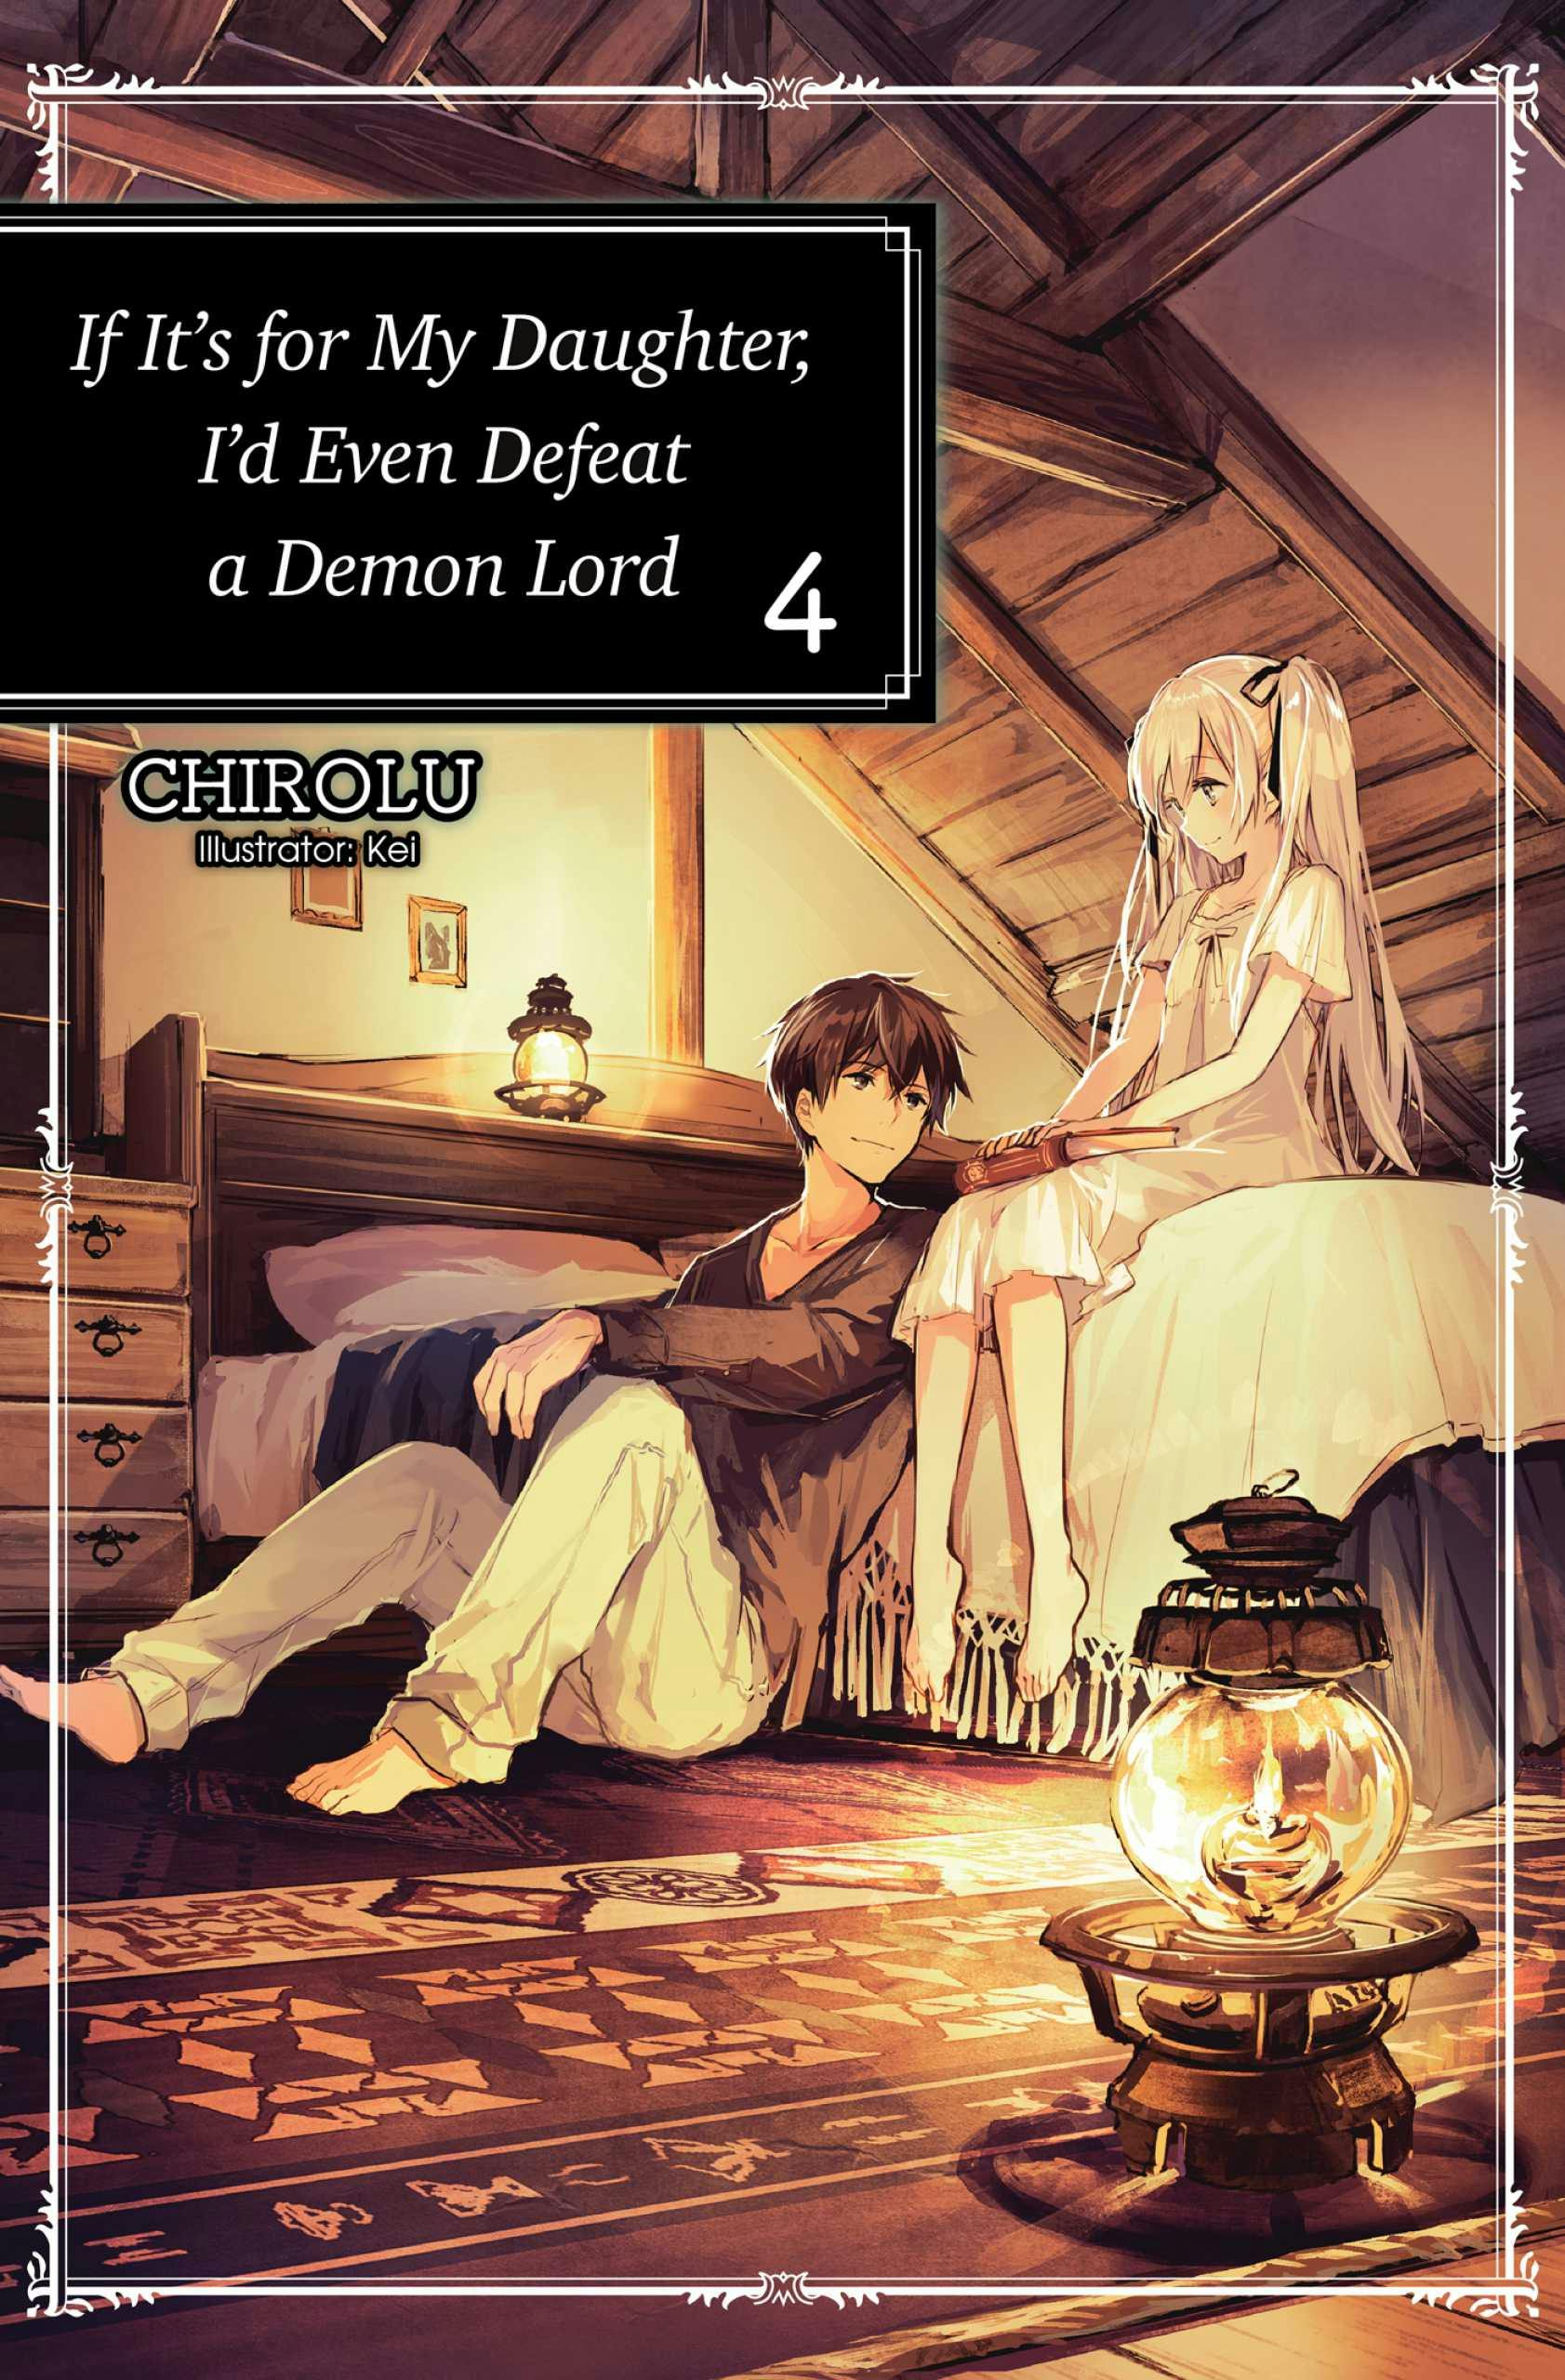 If It’s for My Daughter, I’d Even Defeat a Demon Lord: Volume 4 - CHIROLU